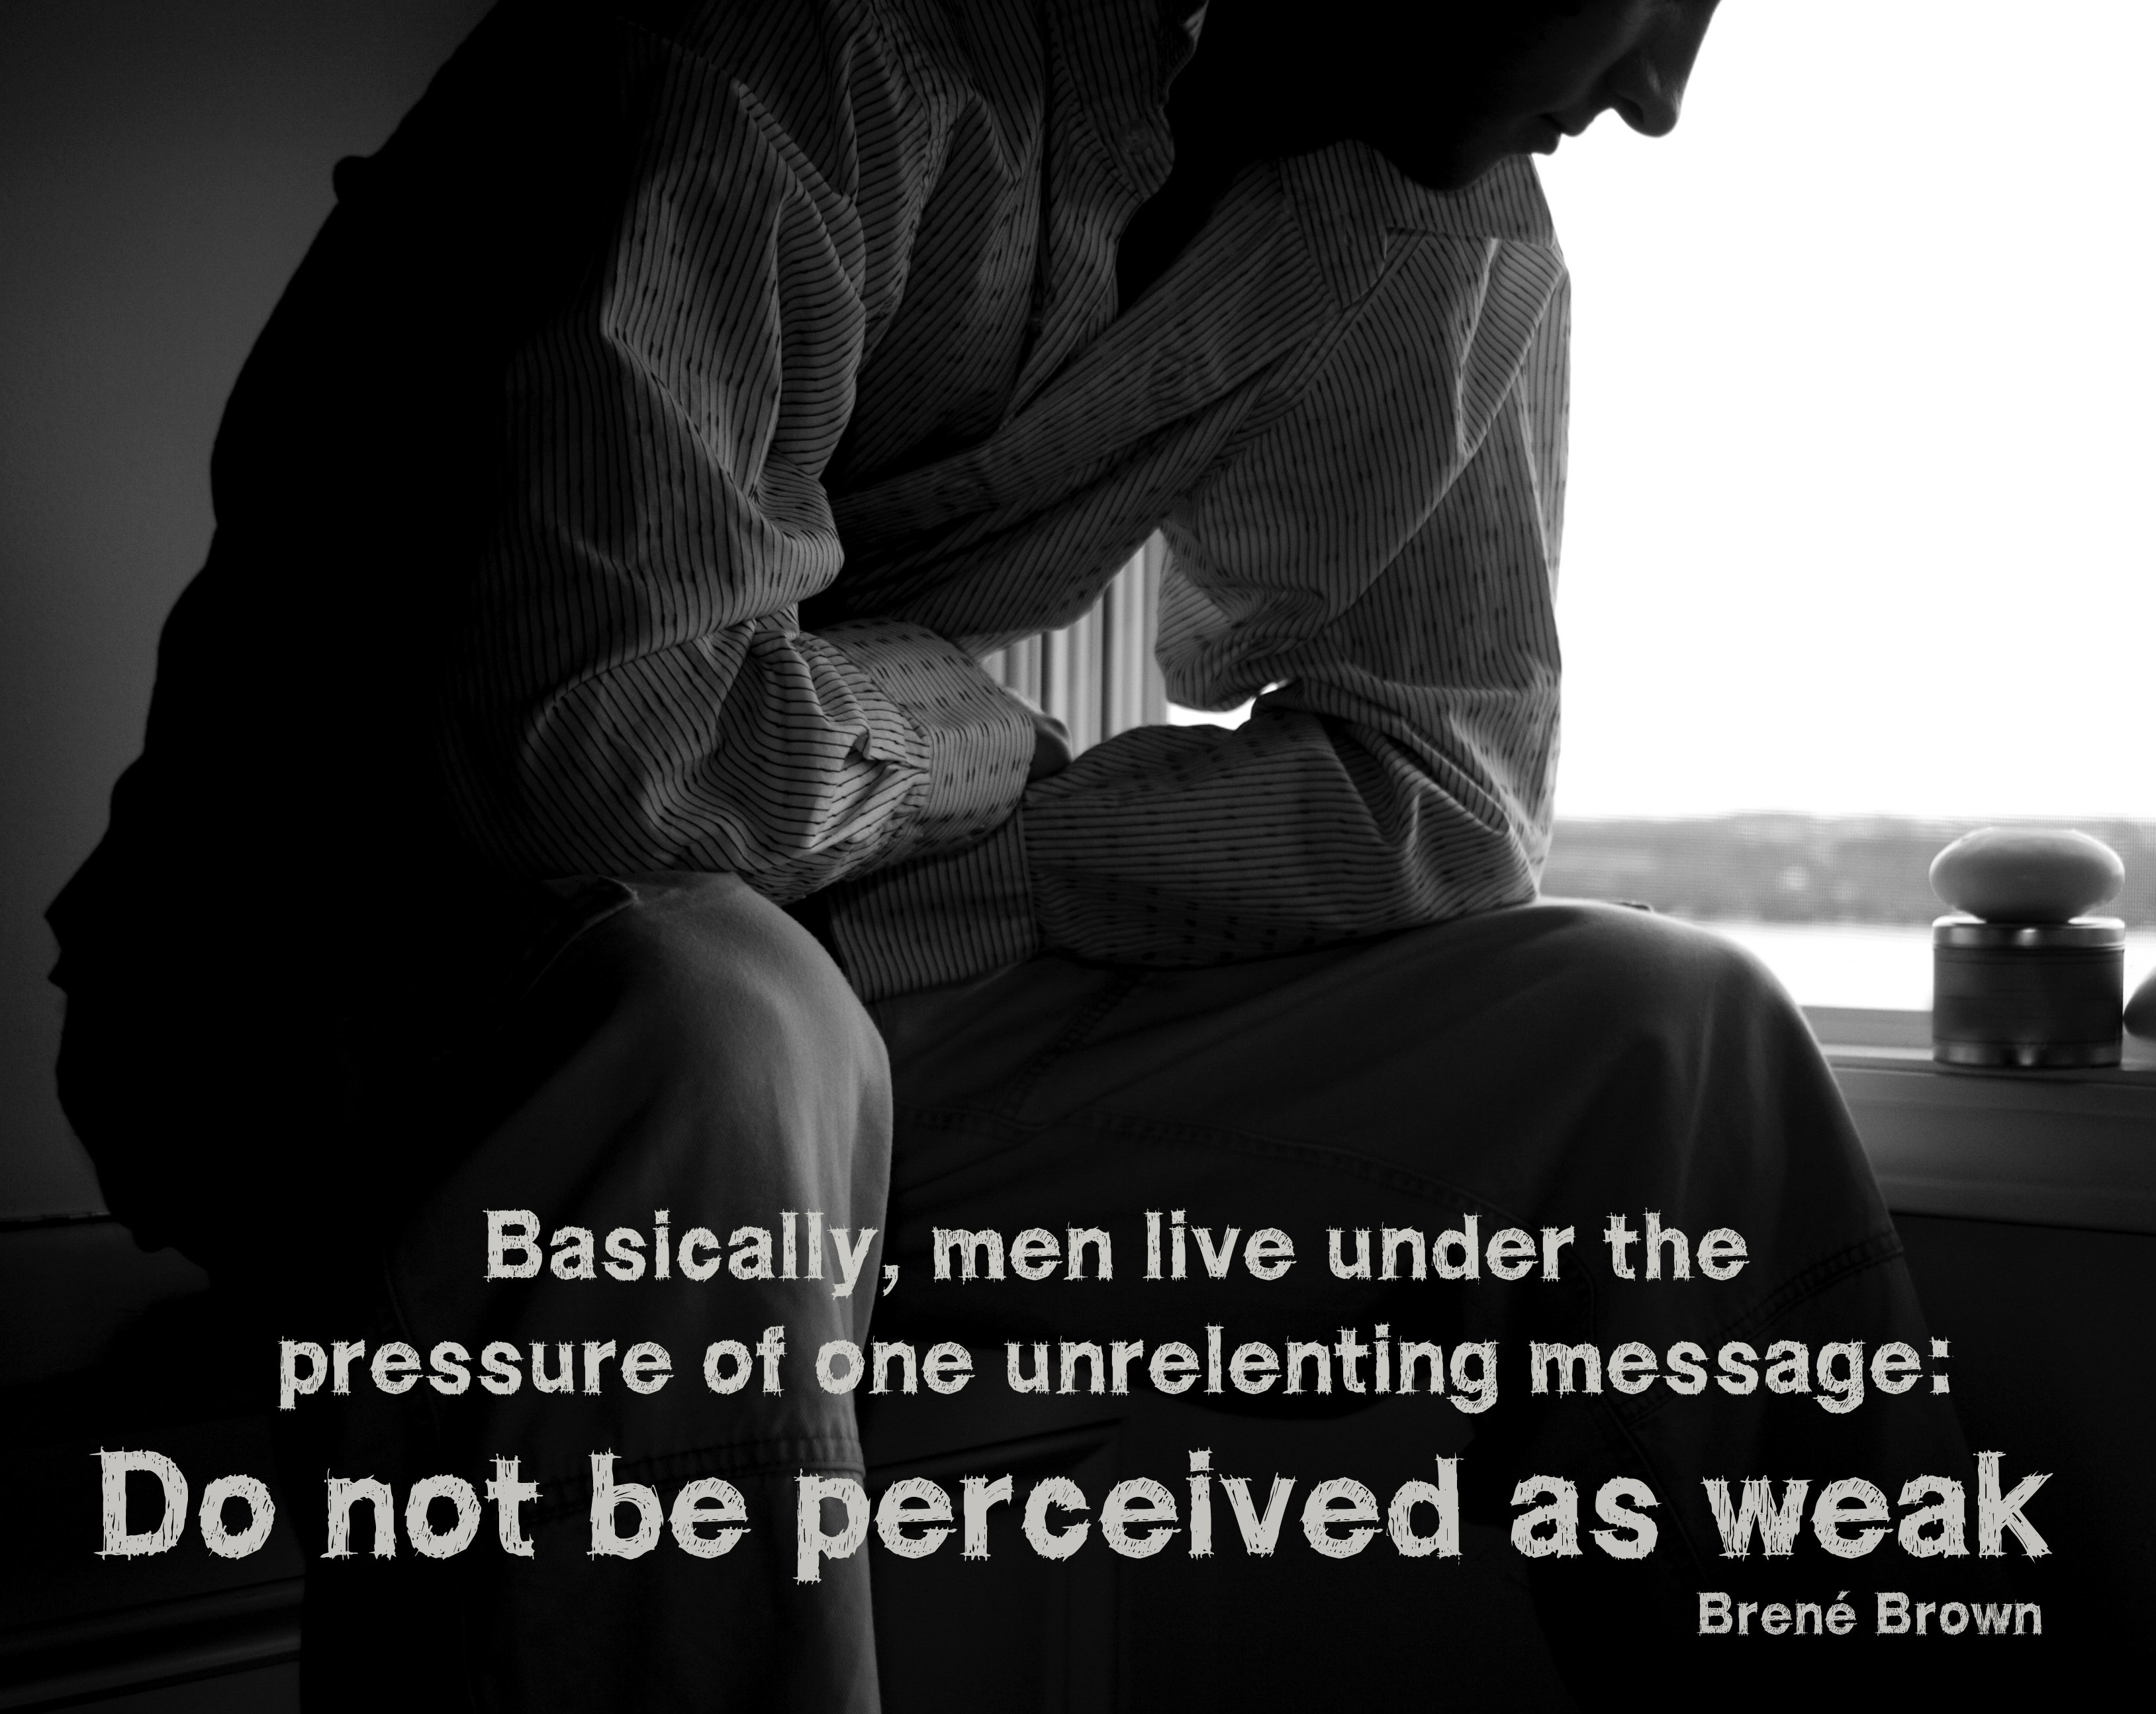 Men live under the pressure of one unrelenting message: Do not be perceived as weak.